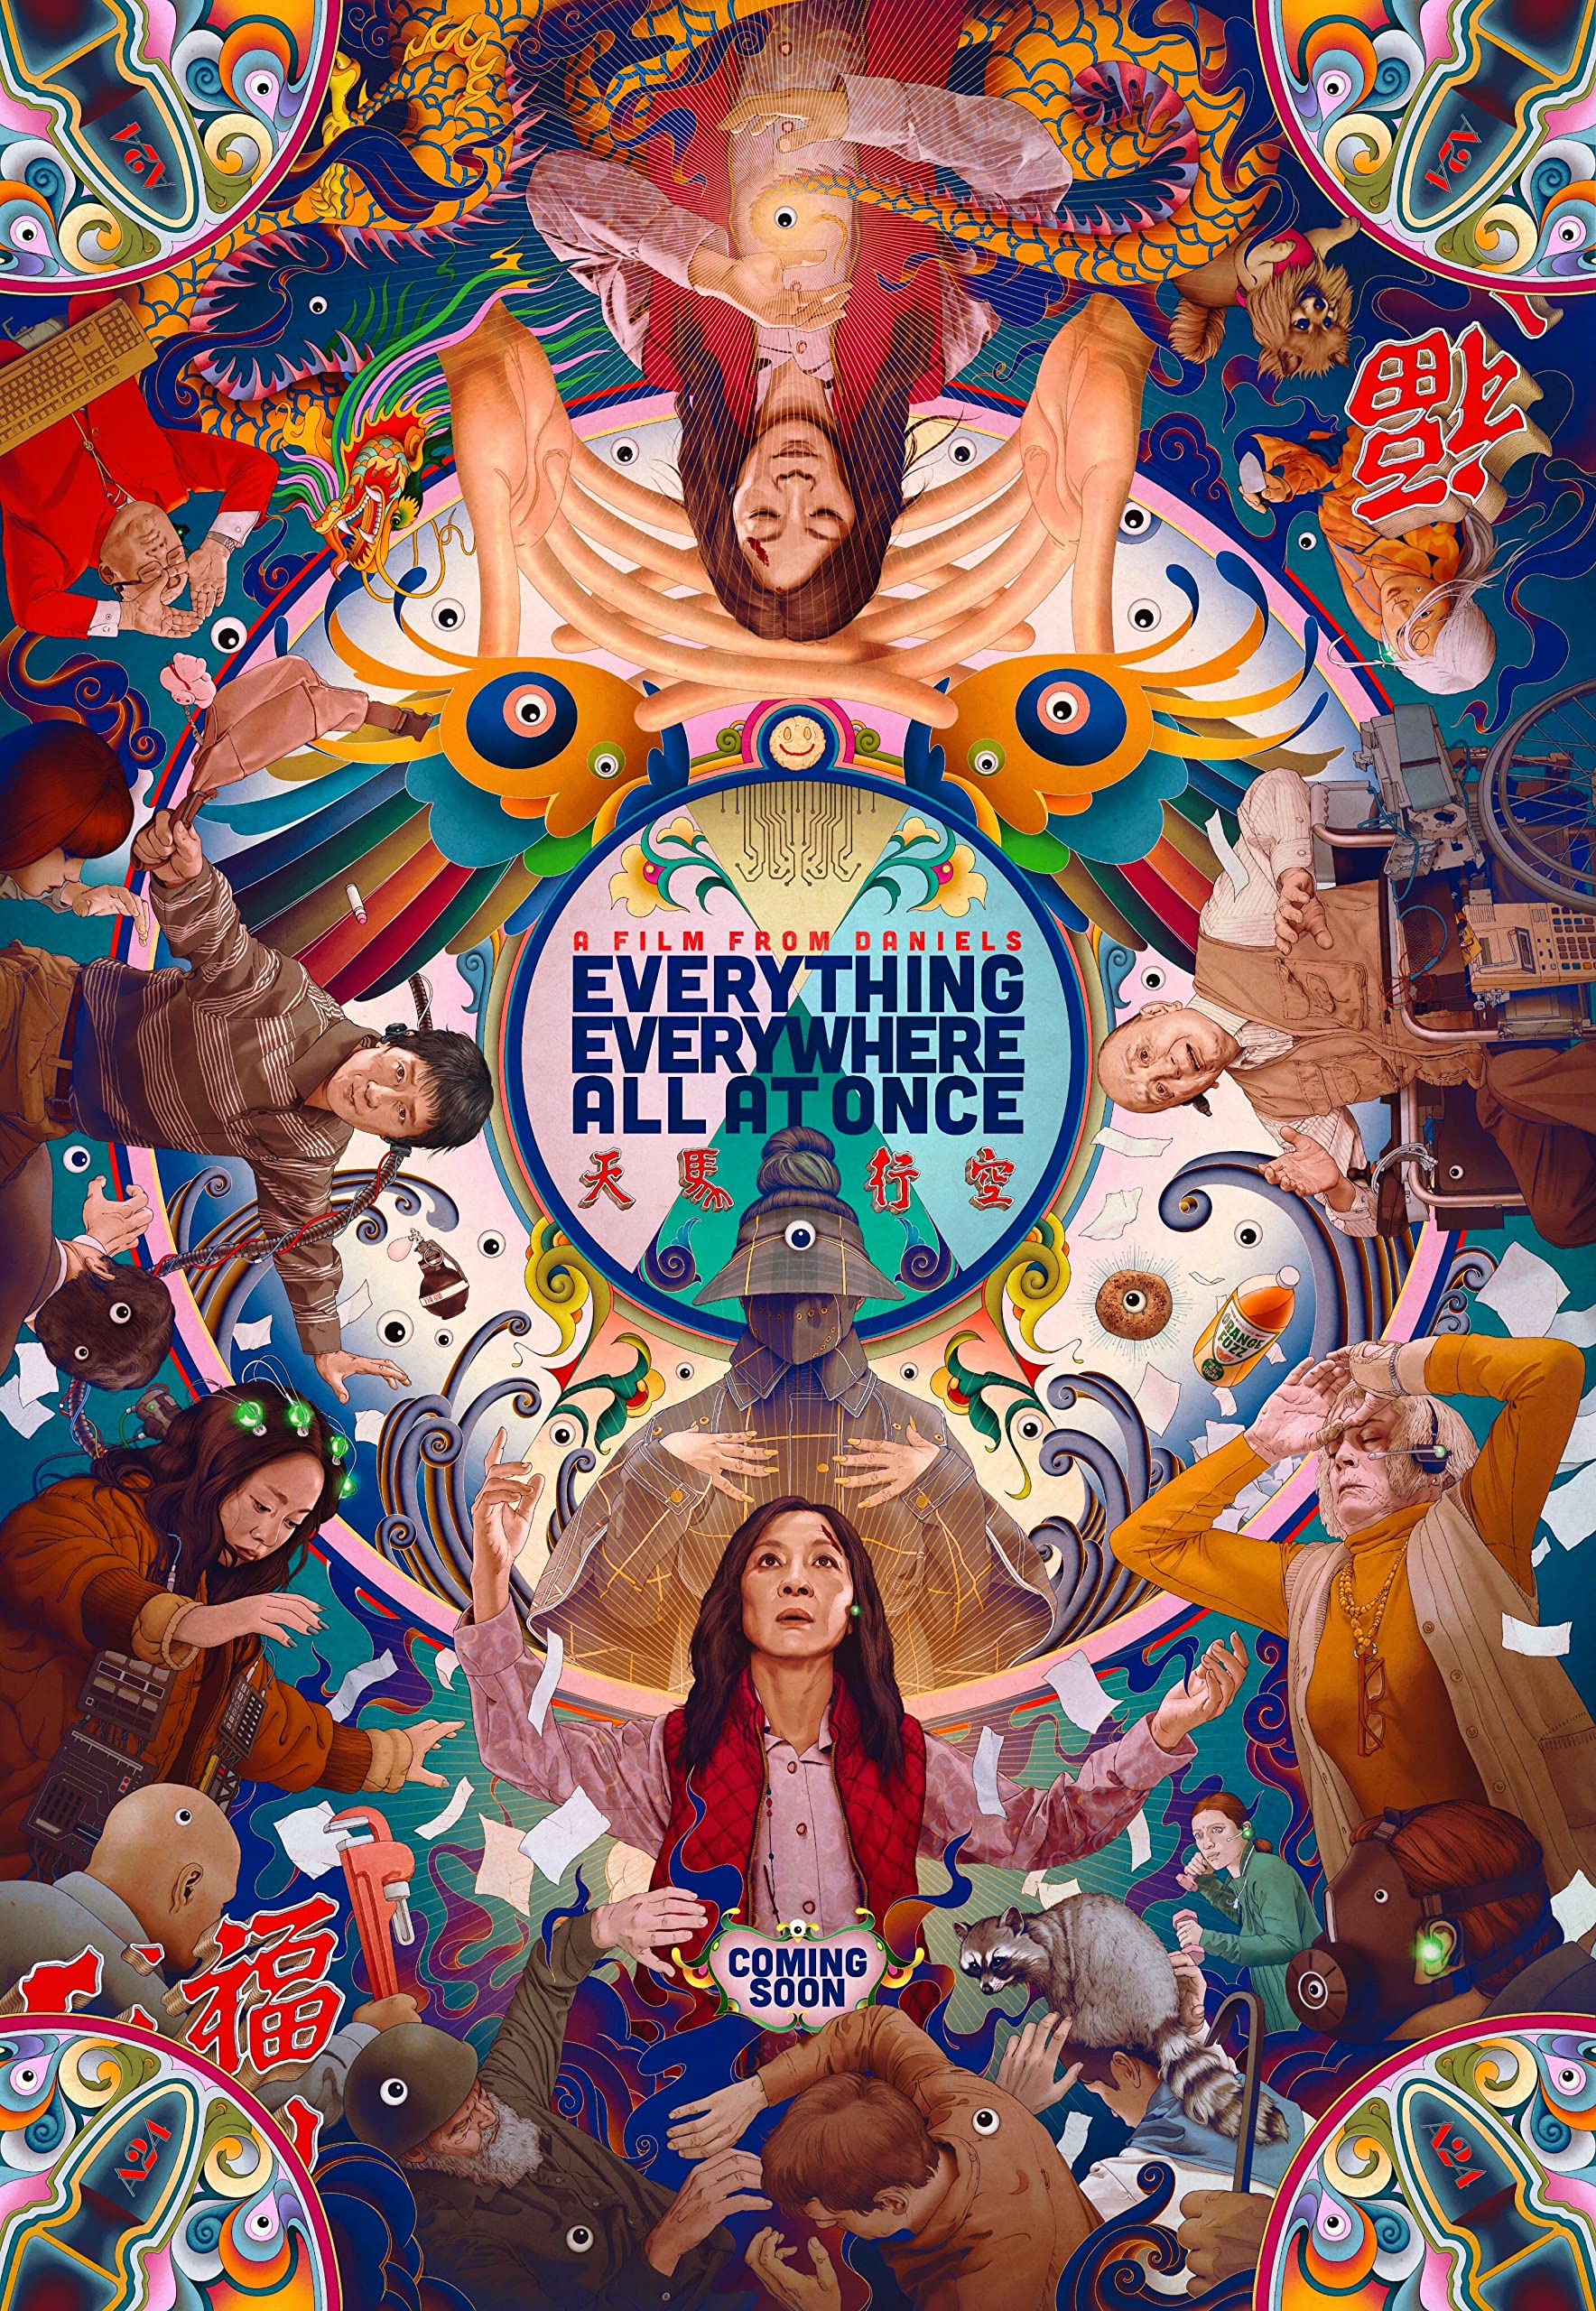 Film poster for EVERYTHING EVERYWHERE ALL AT ONCE (2022)